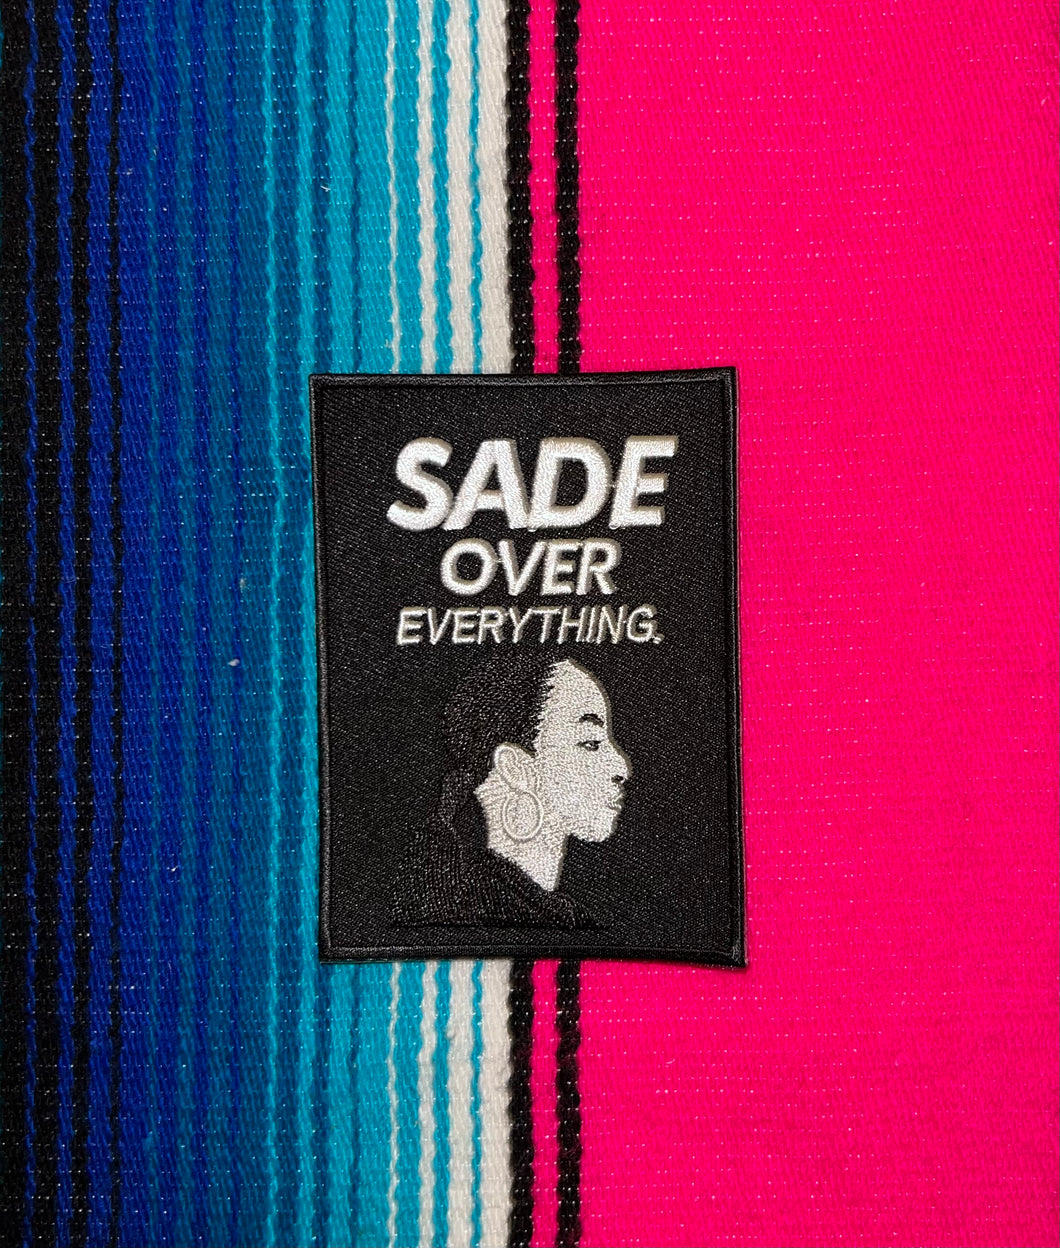 Definitive Selection - “Sade Over Everything” Patch